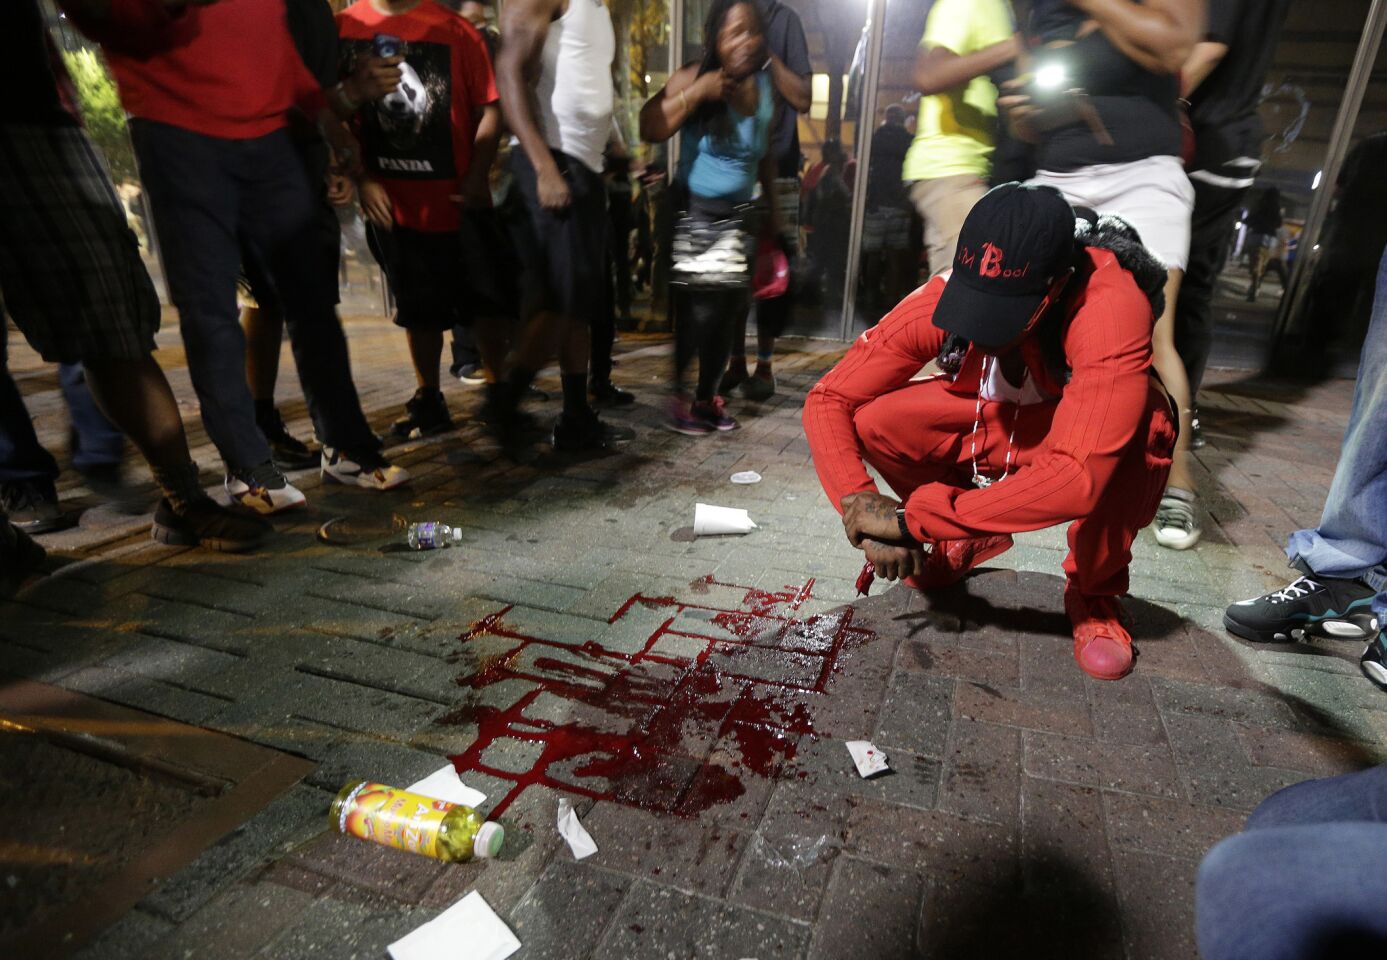 A protester sits near a pool of blood after a man was shot during a demonstration over the fatal police shooting of Keith Lamont Scott in Charlotte, N.C. The man, Justin Carr, later died at a local hospital, and police said they arrested and charged a man with with the shooting.